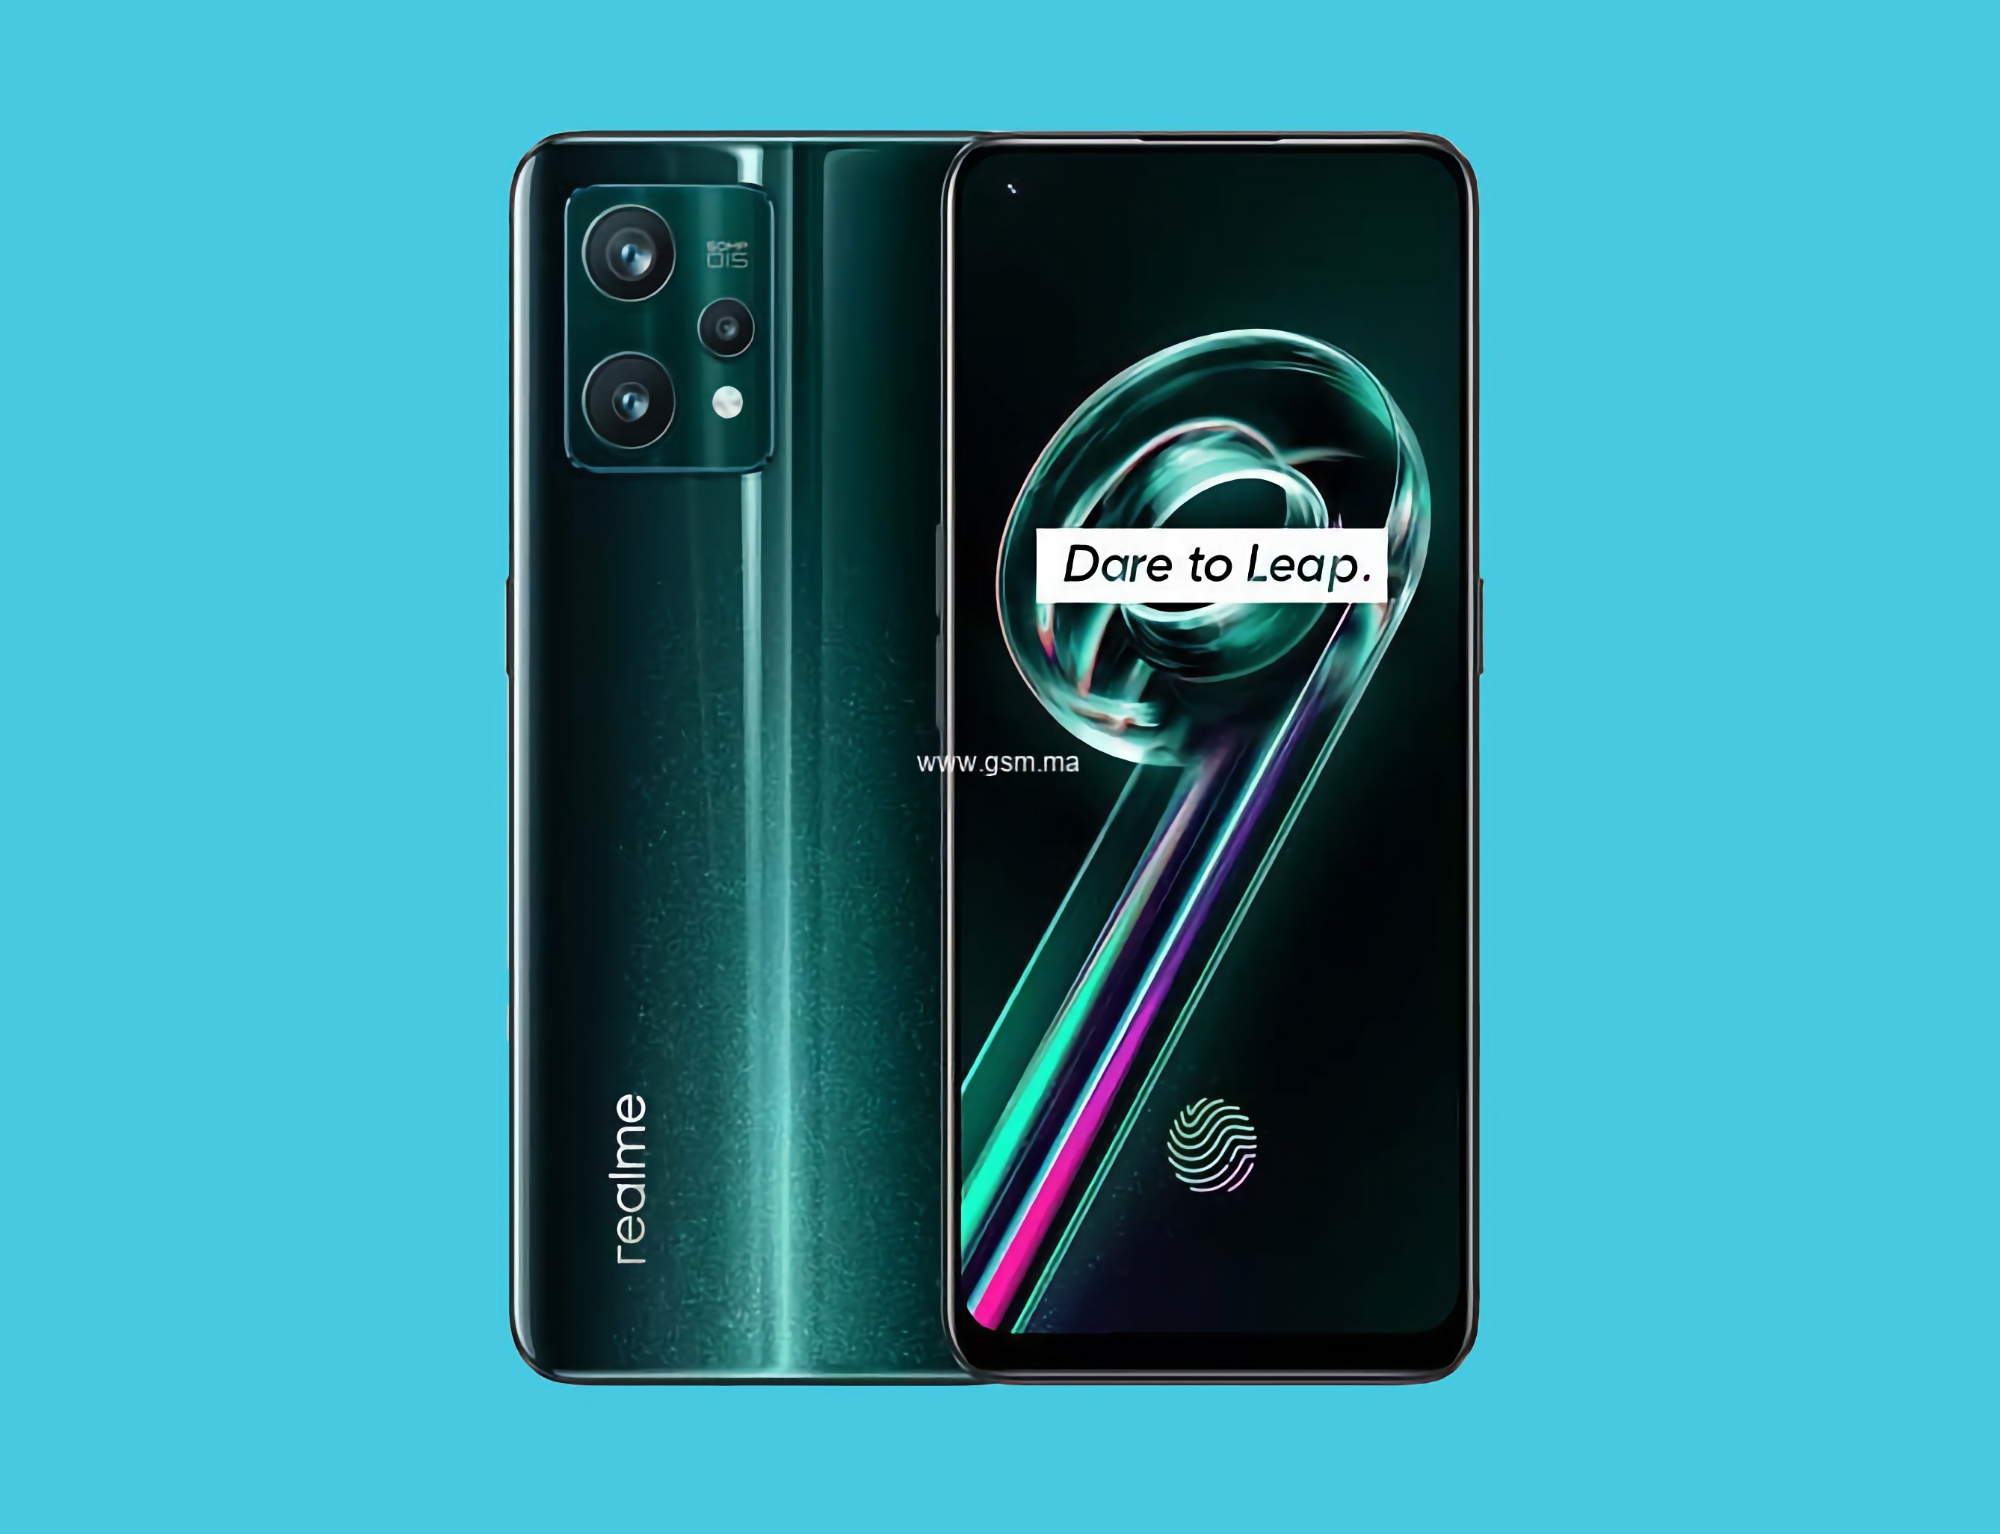 The realme 9 Pro 5G has received the Android 14 beta with realme UI 5.0